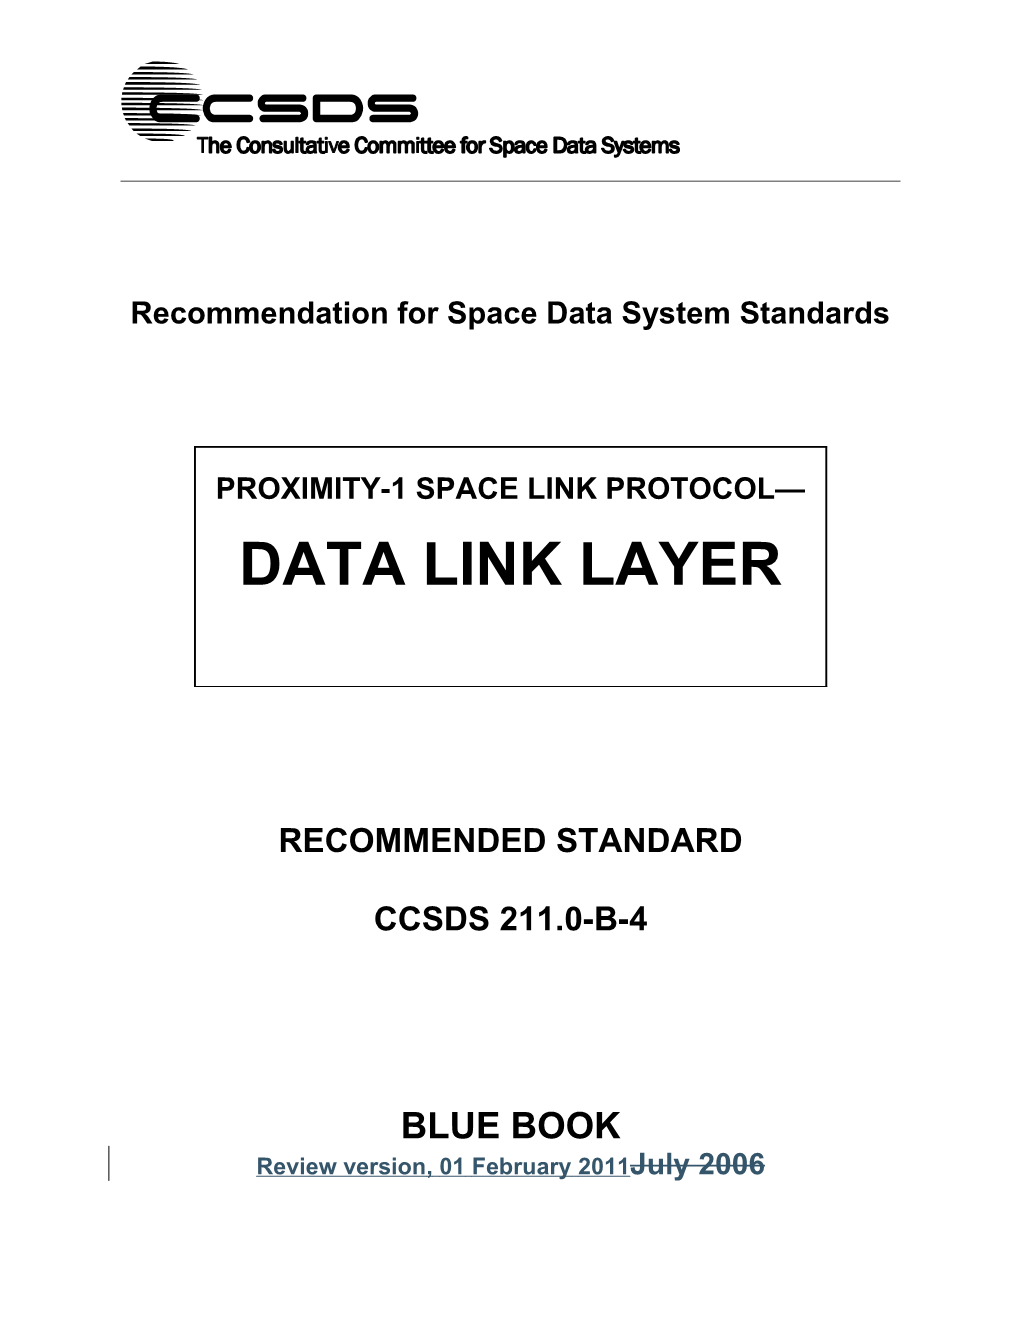 Proximity-1 Space Link Protocol Data Link Layer